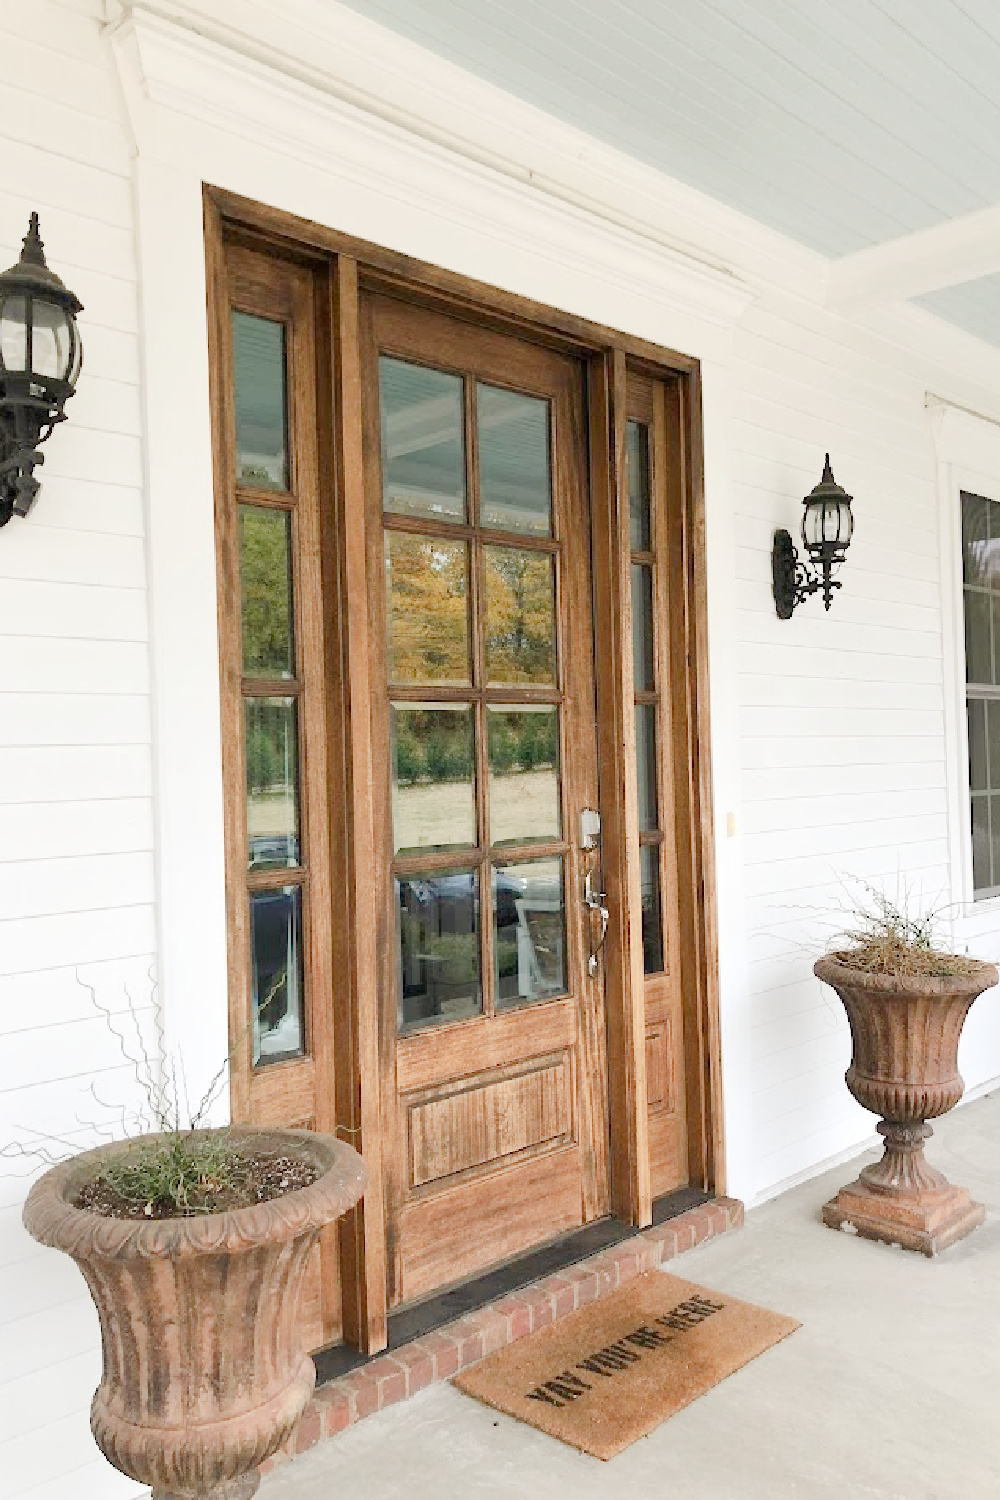 Front door with sidelights at white traditional Southern cottage style home with wide front porch and dormers - Franklin, TN - Hello Lovely Studio.